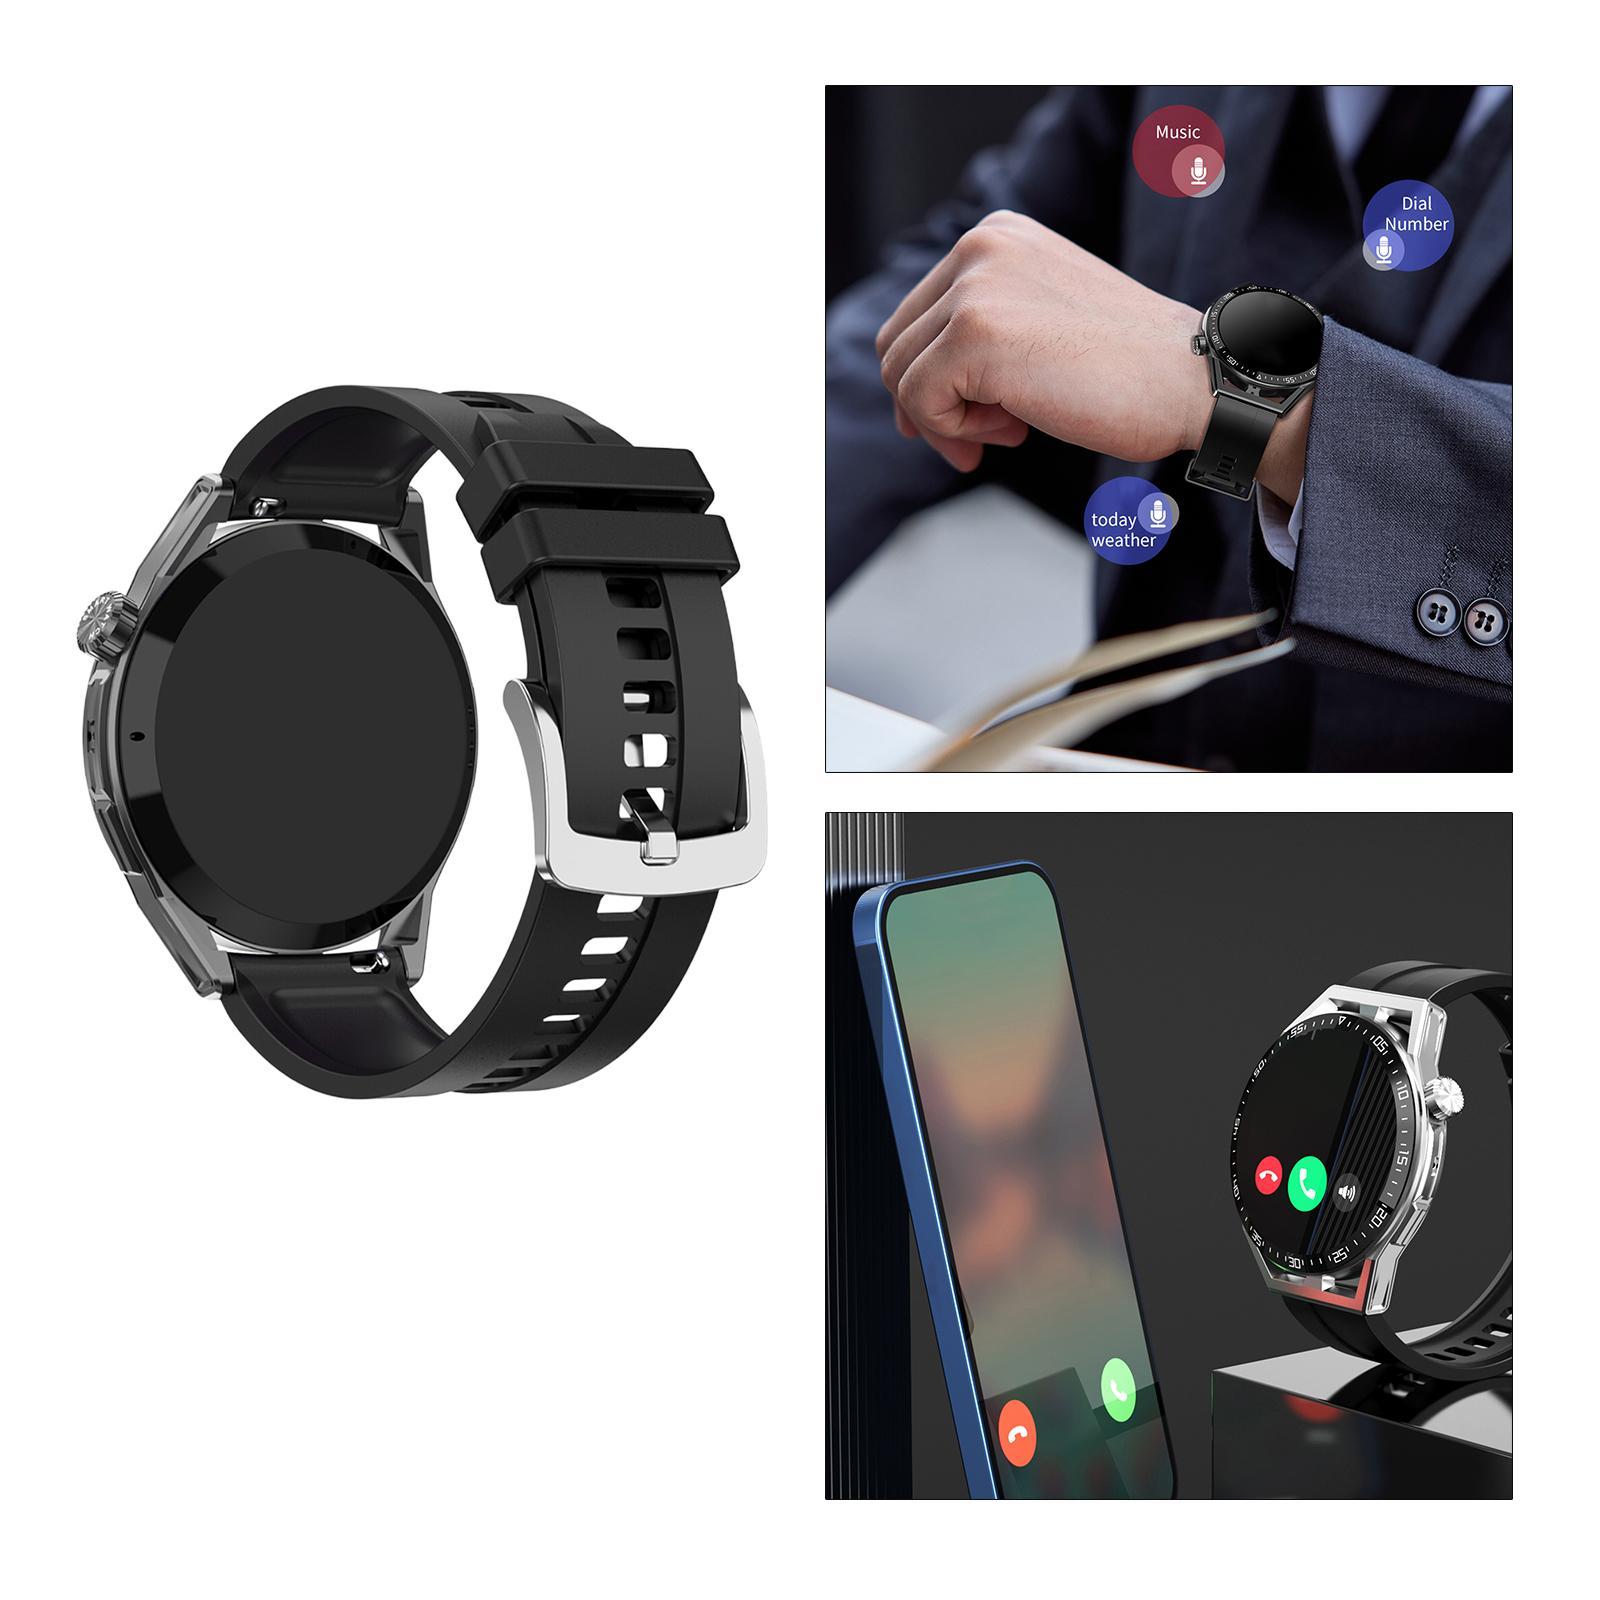 Watch with Slot Waterproof Sleep Tracking Black Rubber Strap